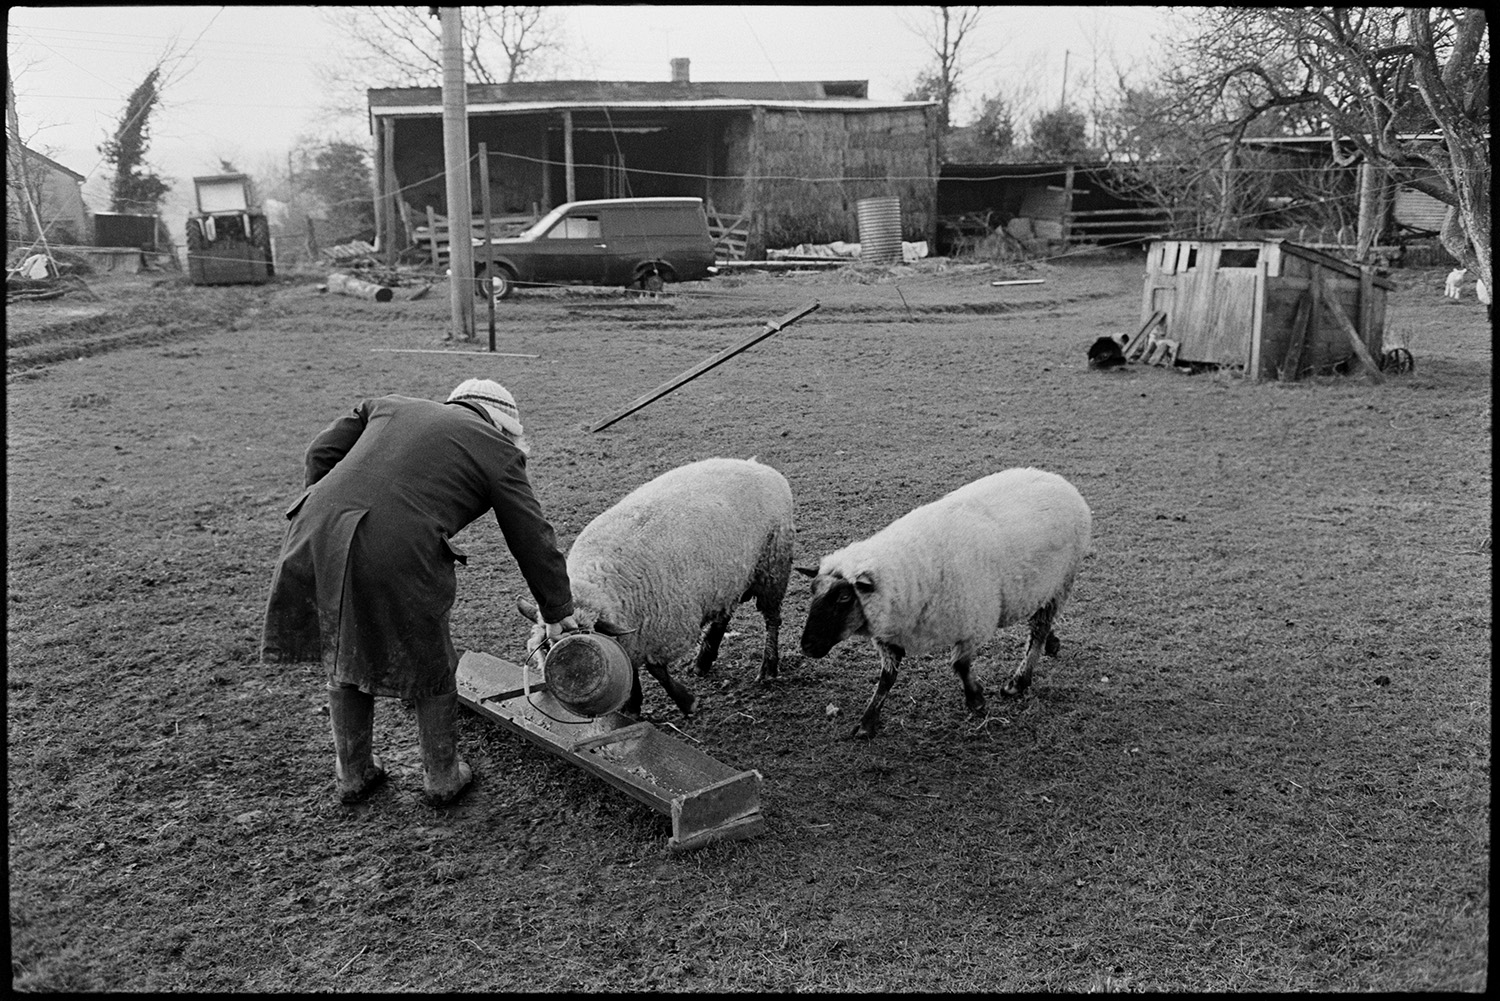 Farmer, woman feeding lambs and ewes. 
[Evelyn Folland emptying a bucket of feed into a trough for two sheep in the farmyard at Higher Upcott, Dolton. A wooden shed, van, tractor and barn with hay bales can be seen in the background.]